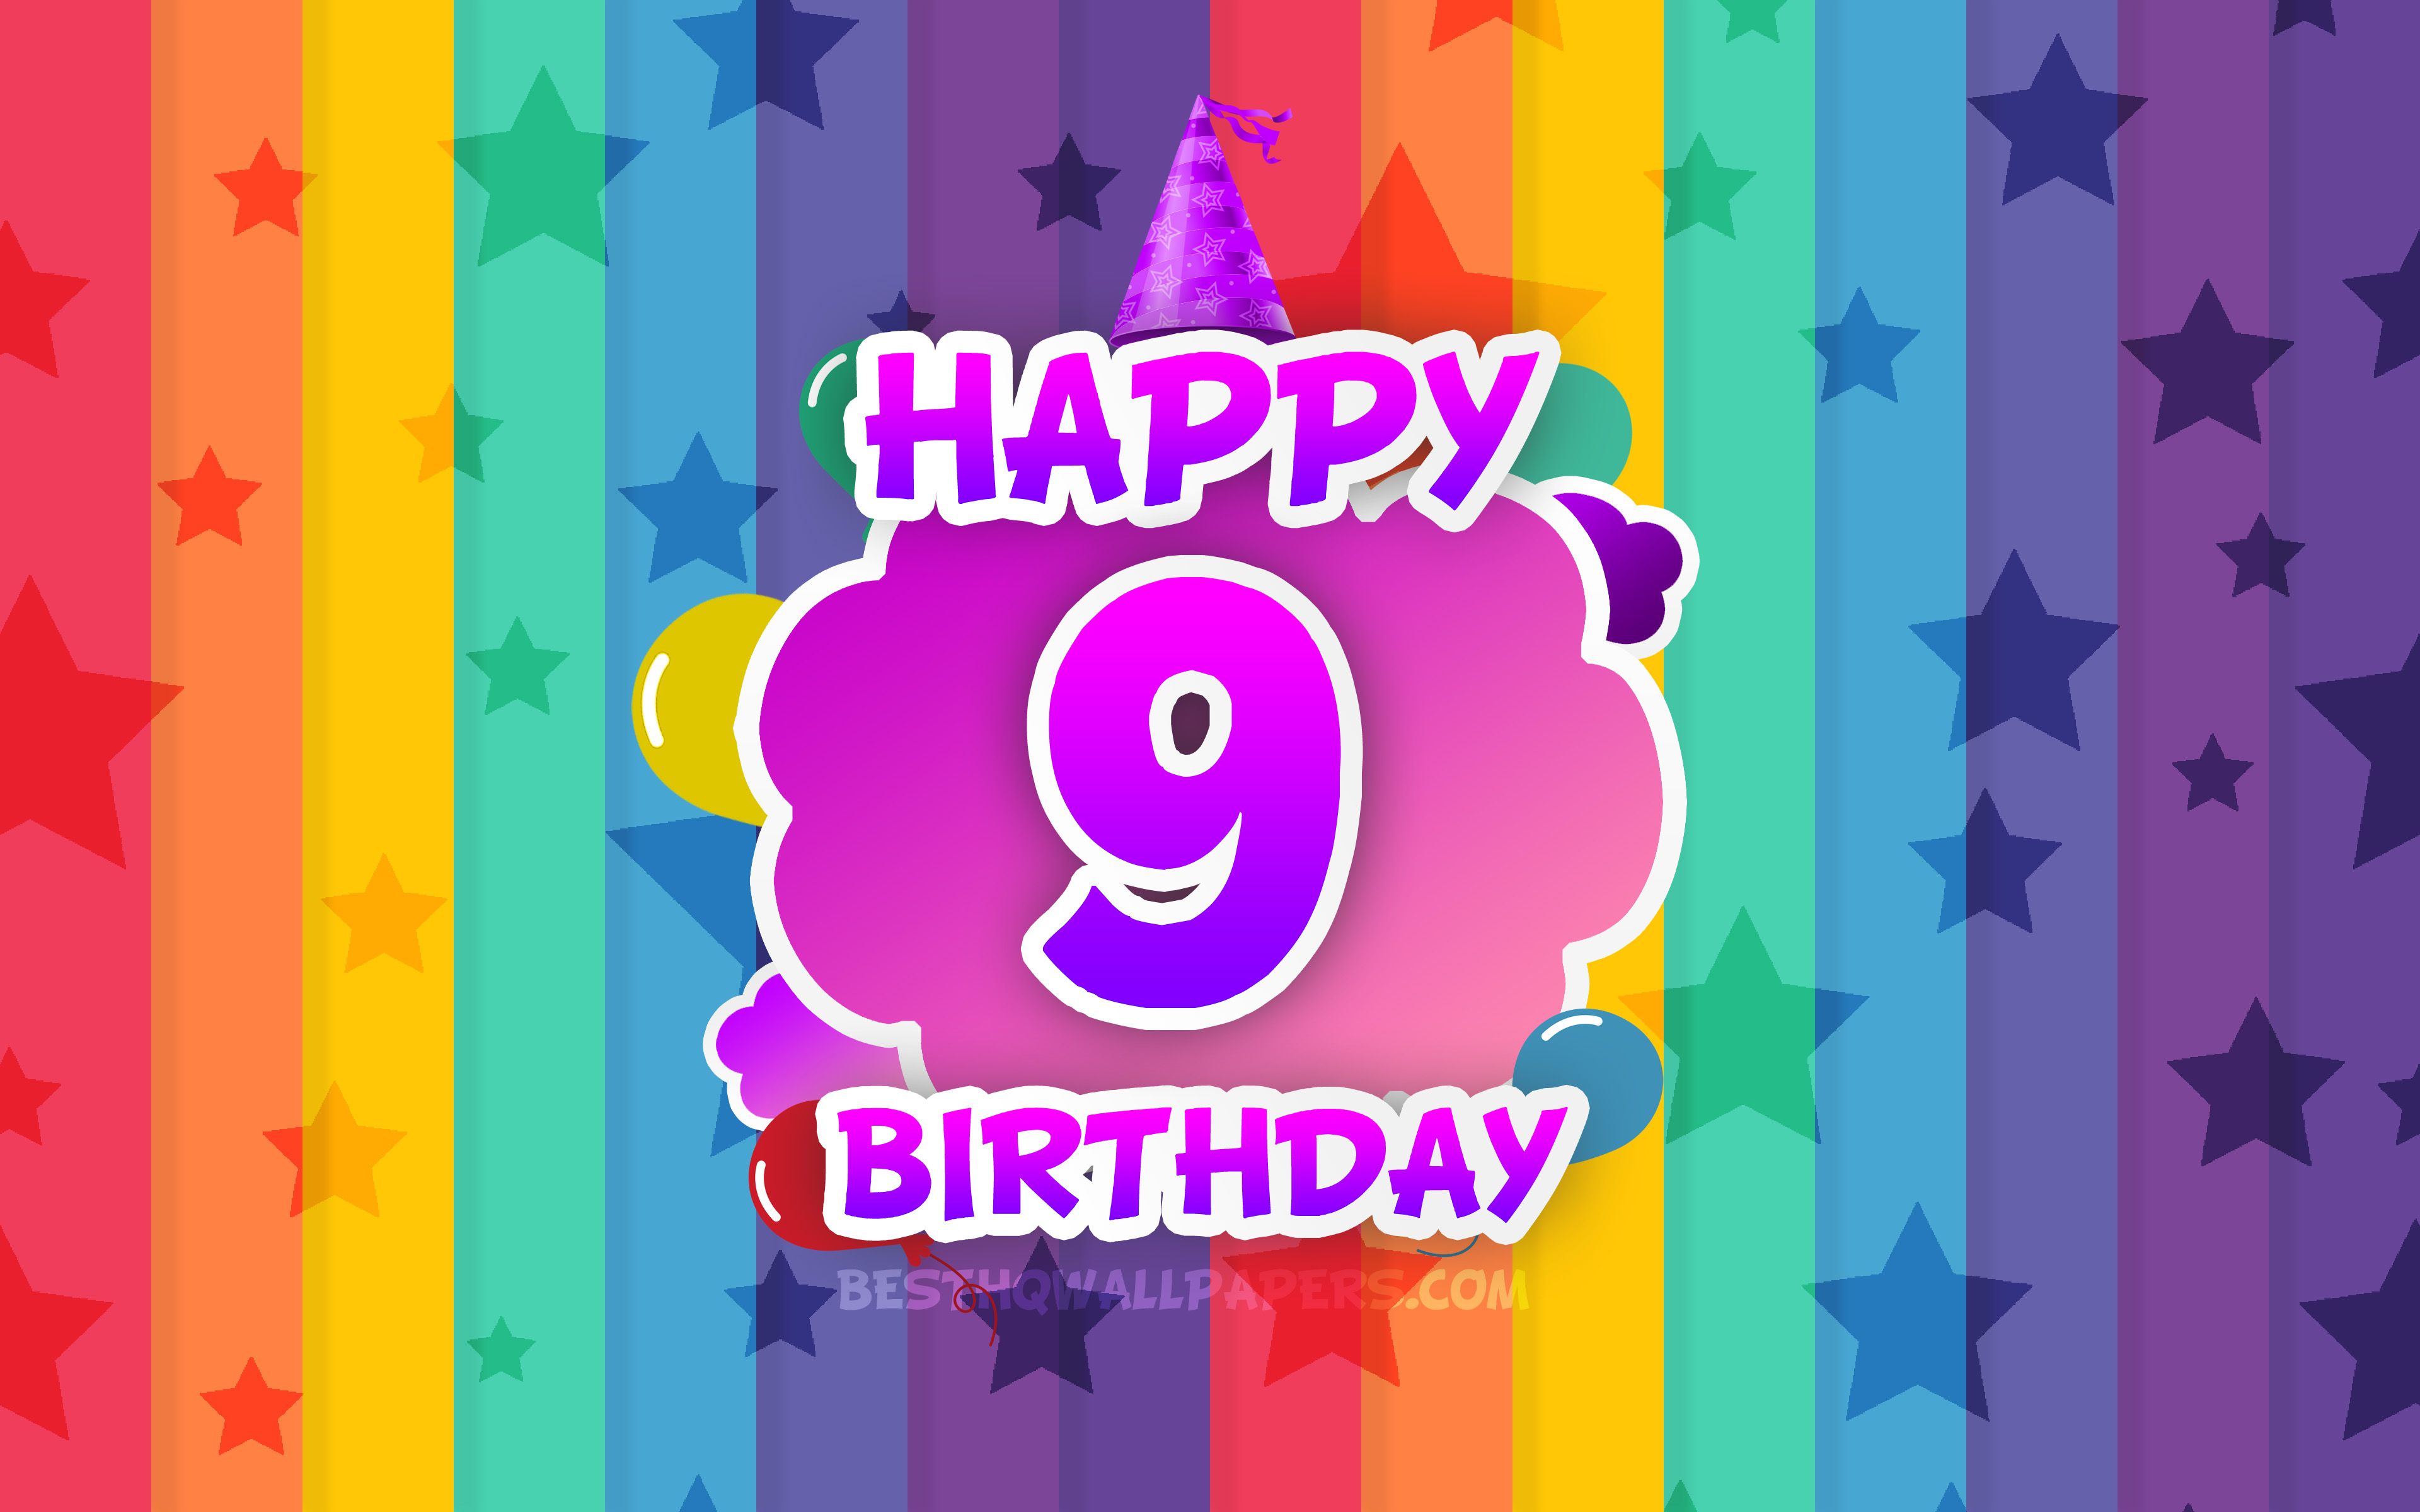 Download wallpaper Happy 9th birthday, colorful clouds, 4k, Birthday concept, rainbow background, Happy 9 Years Birthday, creative 3D letters, 9th Birthday, Birthday Party, 9th Birthday Party for desktop with resolution 3840x2400. High